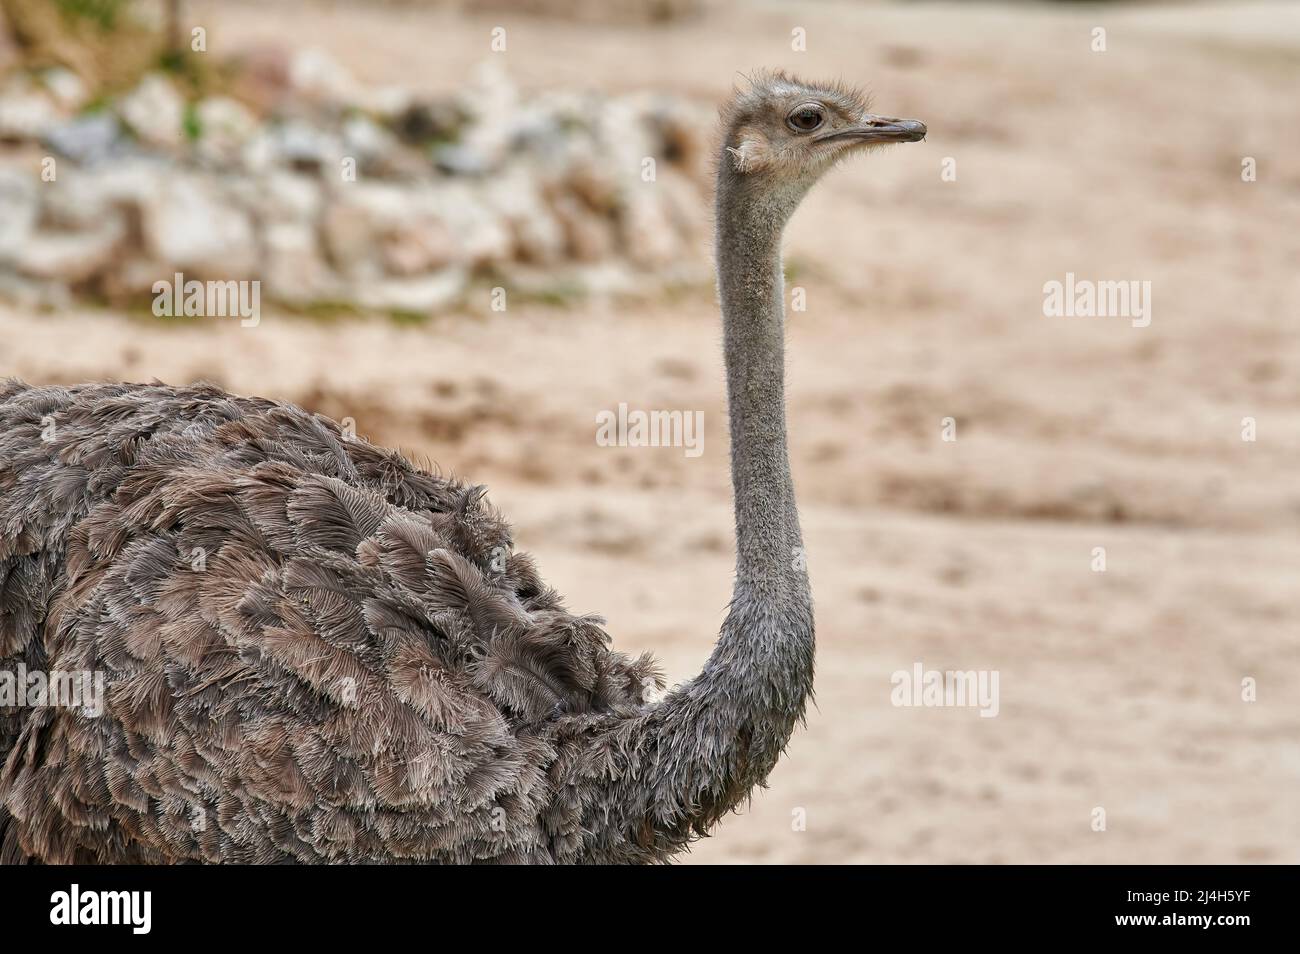 Portrait of an ostrich (Struthio camelus) in profile looking forward with its long neck and beautiful feathers Stock Photo